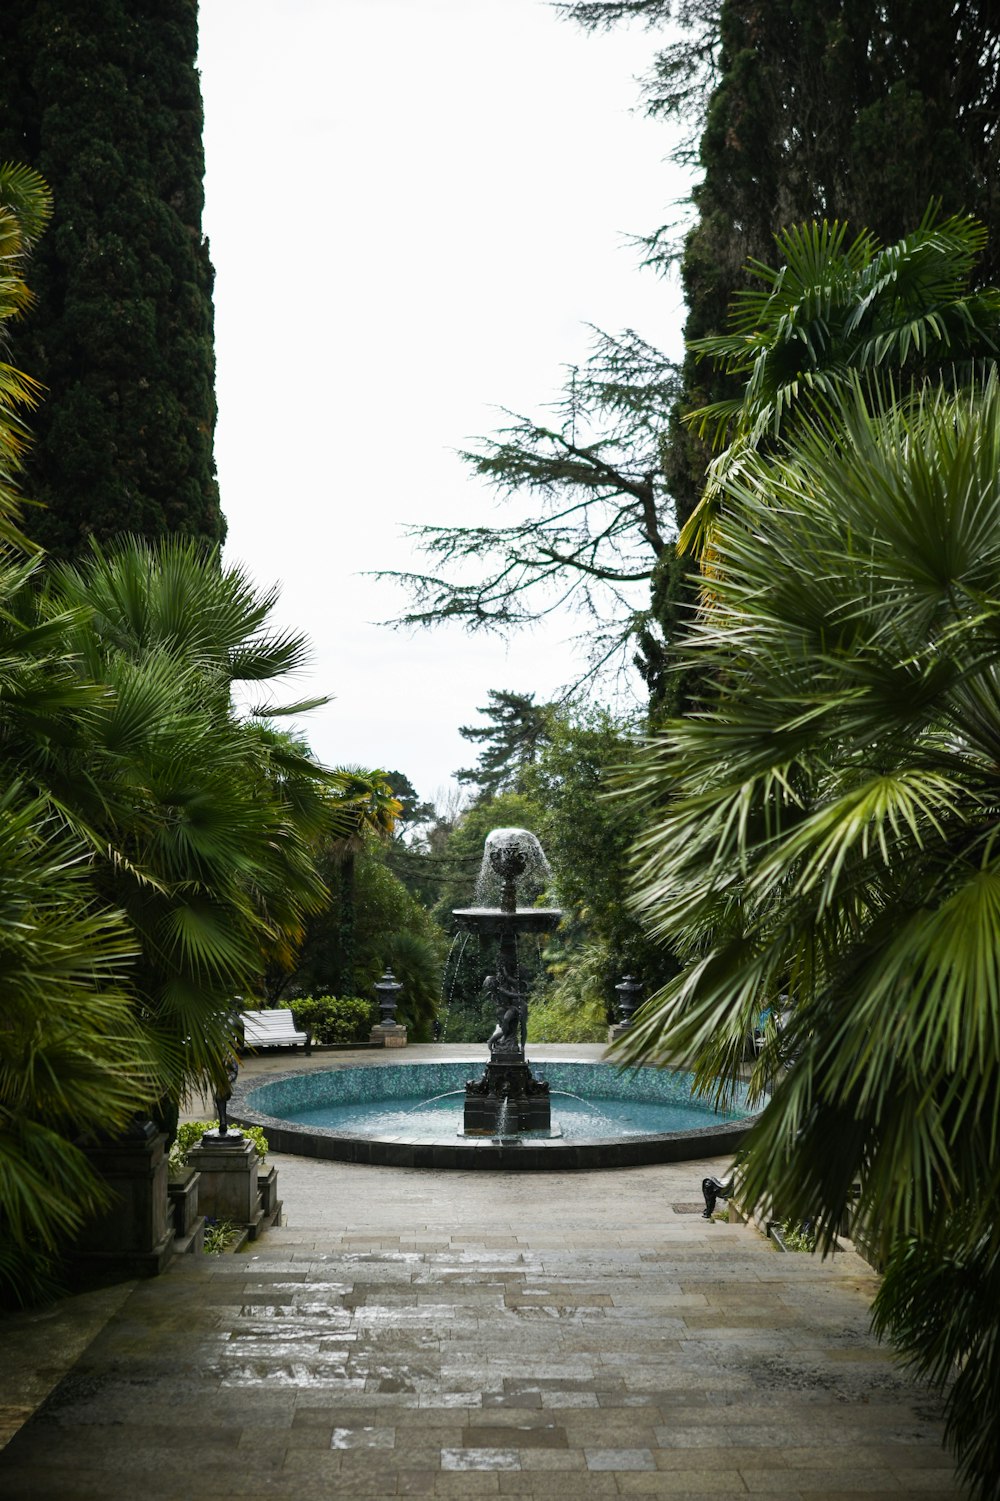 a fountain surrounded by palm trees in a garden